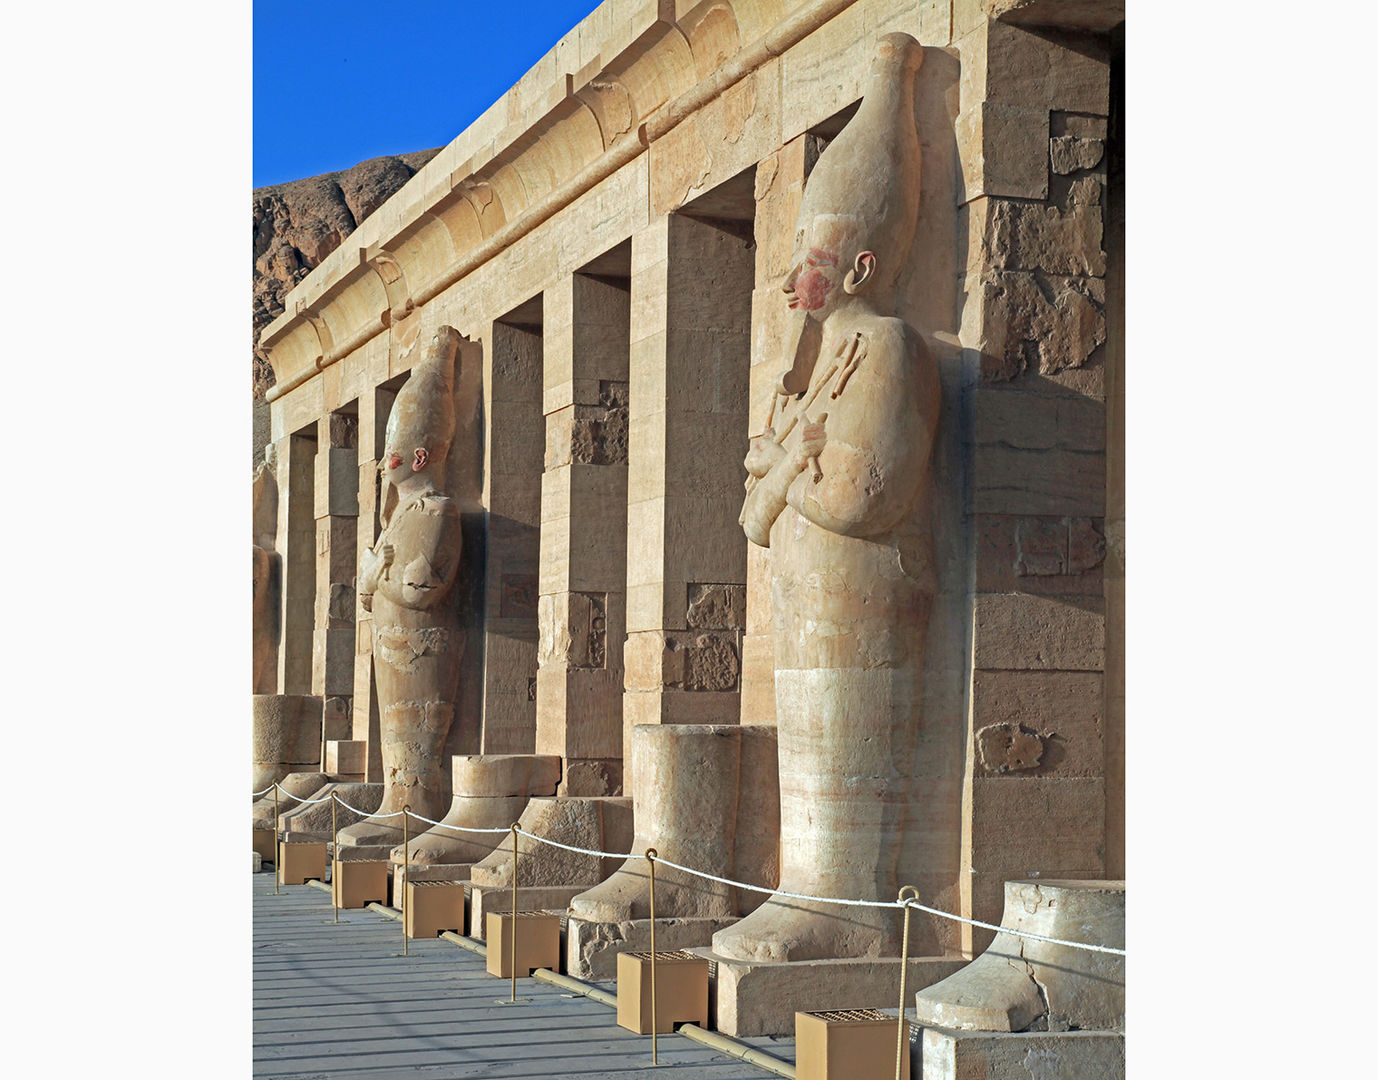 Color photograph showing the facade of a temple, with several pilasters and two complete mummiform statues wearing tall crowns visible.